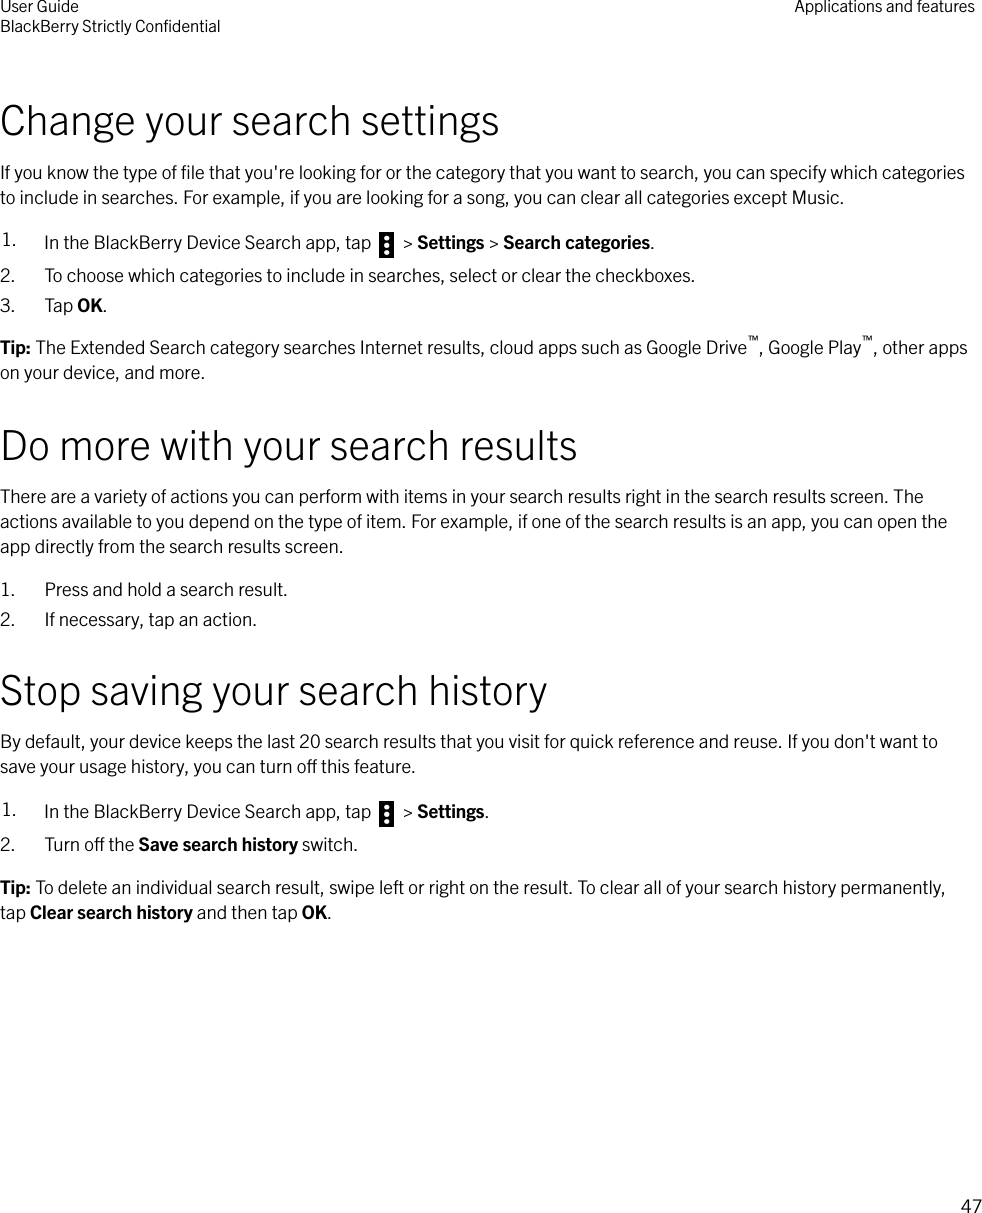 Change your search settingsIf you know the type of ﬁle that you&apos;re looking for or the category that you want to search, you can specify which categoriesto include in searches. For example, if you are looking for a song, you can clear all categories except Music.1. In the BlackBerry Device Search app, tap   &gt; Settings &gt; Search categories.2. To choose which categories to include in searches, select or clear the checkboxes.3. Tap OK.Tip: The Extended Search category searches Internet results, cloud apps such as Google Drive™, Google Play™, other appson your device, and more.Do more with your search resultsThere are a variety of actions you can perform with items in your search results right in the search results screen. Theactions available to you depend on the type of item. For example, if one of the search results is an app, you can open theapp directly from the search results screen.1. Press and hold a search result.2. If necessary, tap an action.Stop saving your search historyBy default, your device keeps the last 20 search results that you visit for quick reference and reuse. If you don&apos;t want tosave your usage history, you can turn o this feature.1. In the BlackBerry Device Search app, tap   &gt; Settings.2. Turn o the Save search history switch.Tip: To delete an individual search result, swipe left or right on the result. To clear all of your search history permanently,tap Clear search history and then tap OK.User GuideBlackBerry Strictly ConﬁdentialApplications and features47